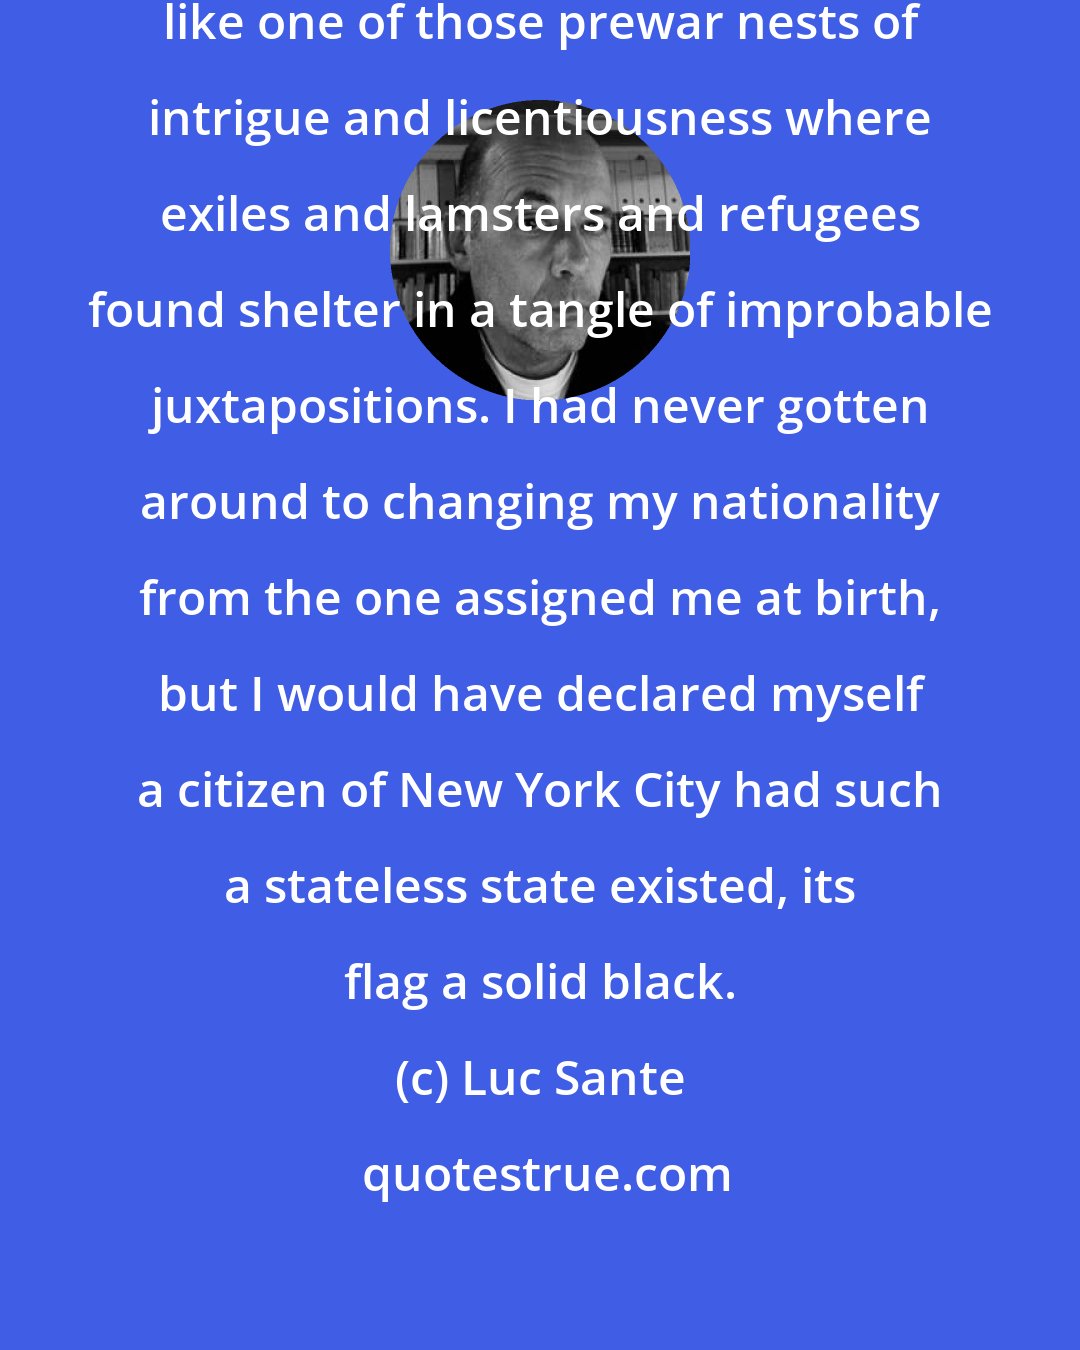 Luc Sante: I thought of New York as a free city, like one of those prewar nests of intrigue and licentiousness where exiles and lamsters and refugees found shelter in a tangle of improbable juxtapositions. I had never gotten around to changing my nationality from the one assigned me at birth, but I would have declared myself a citizen of New York City had such a stateless state existed, its flag a solid black.